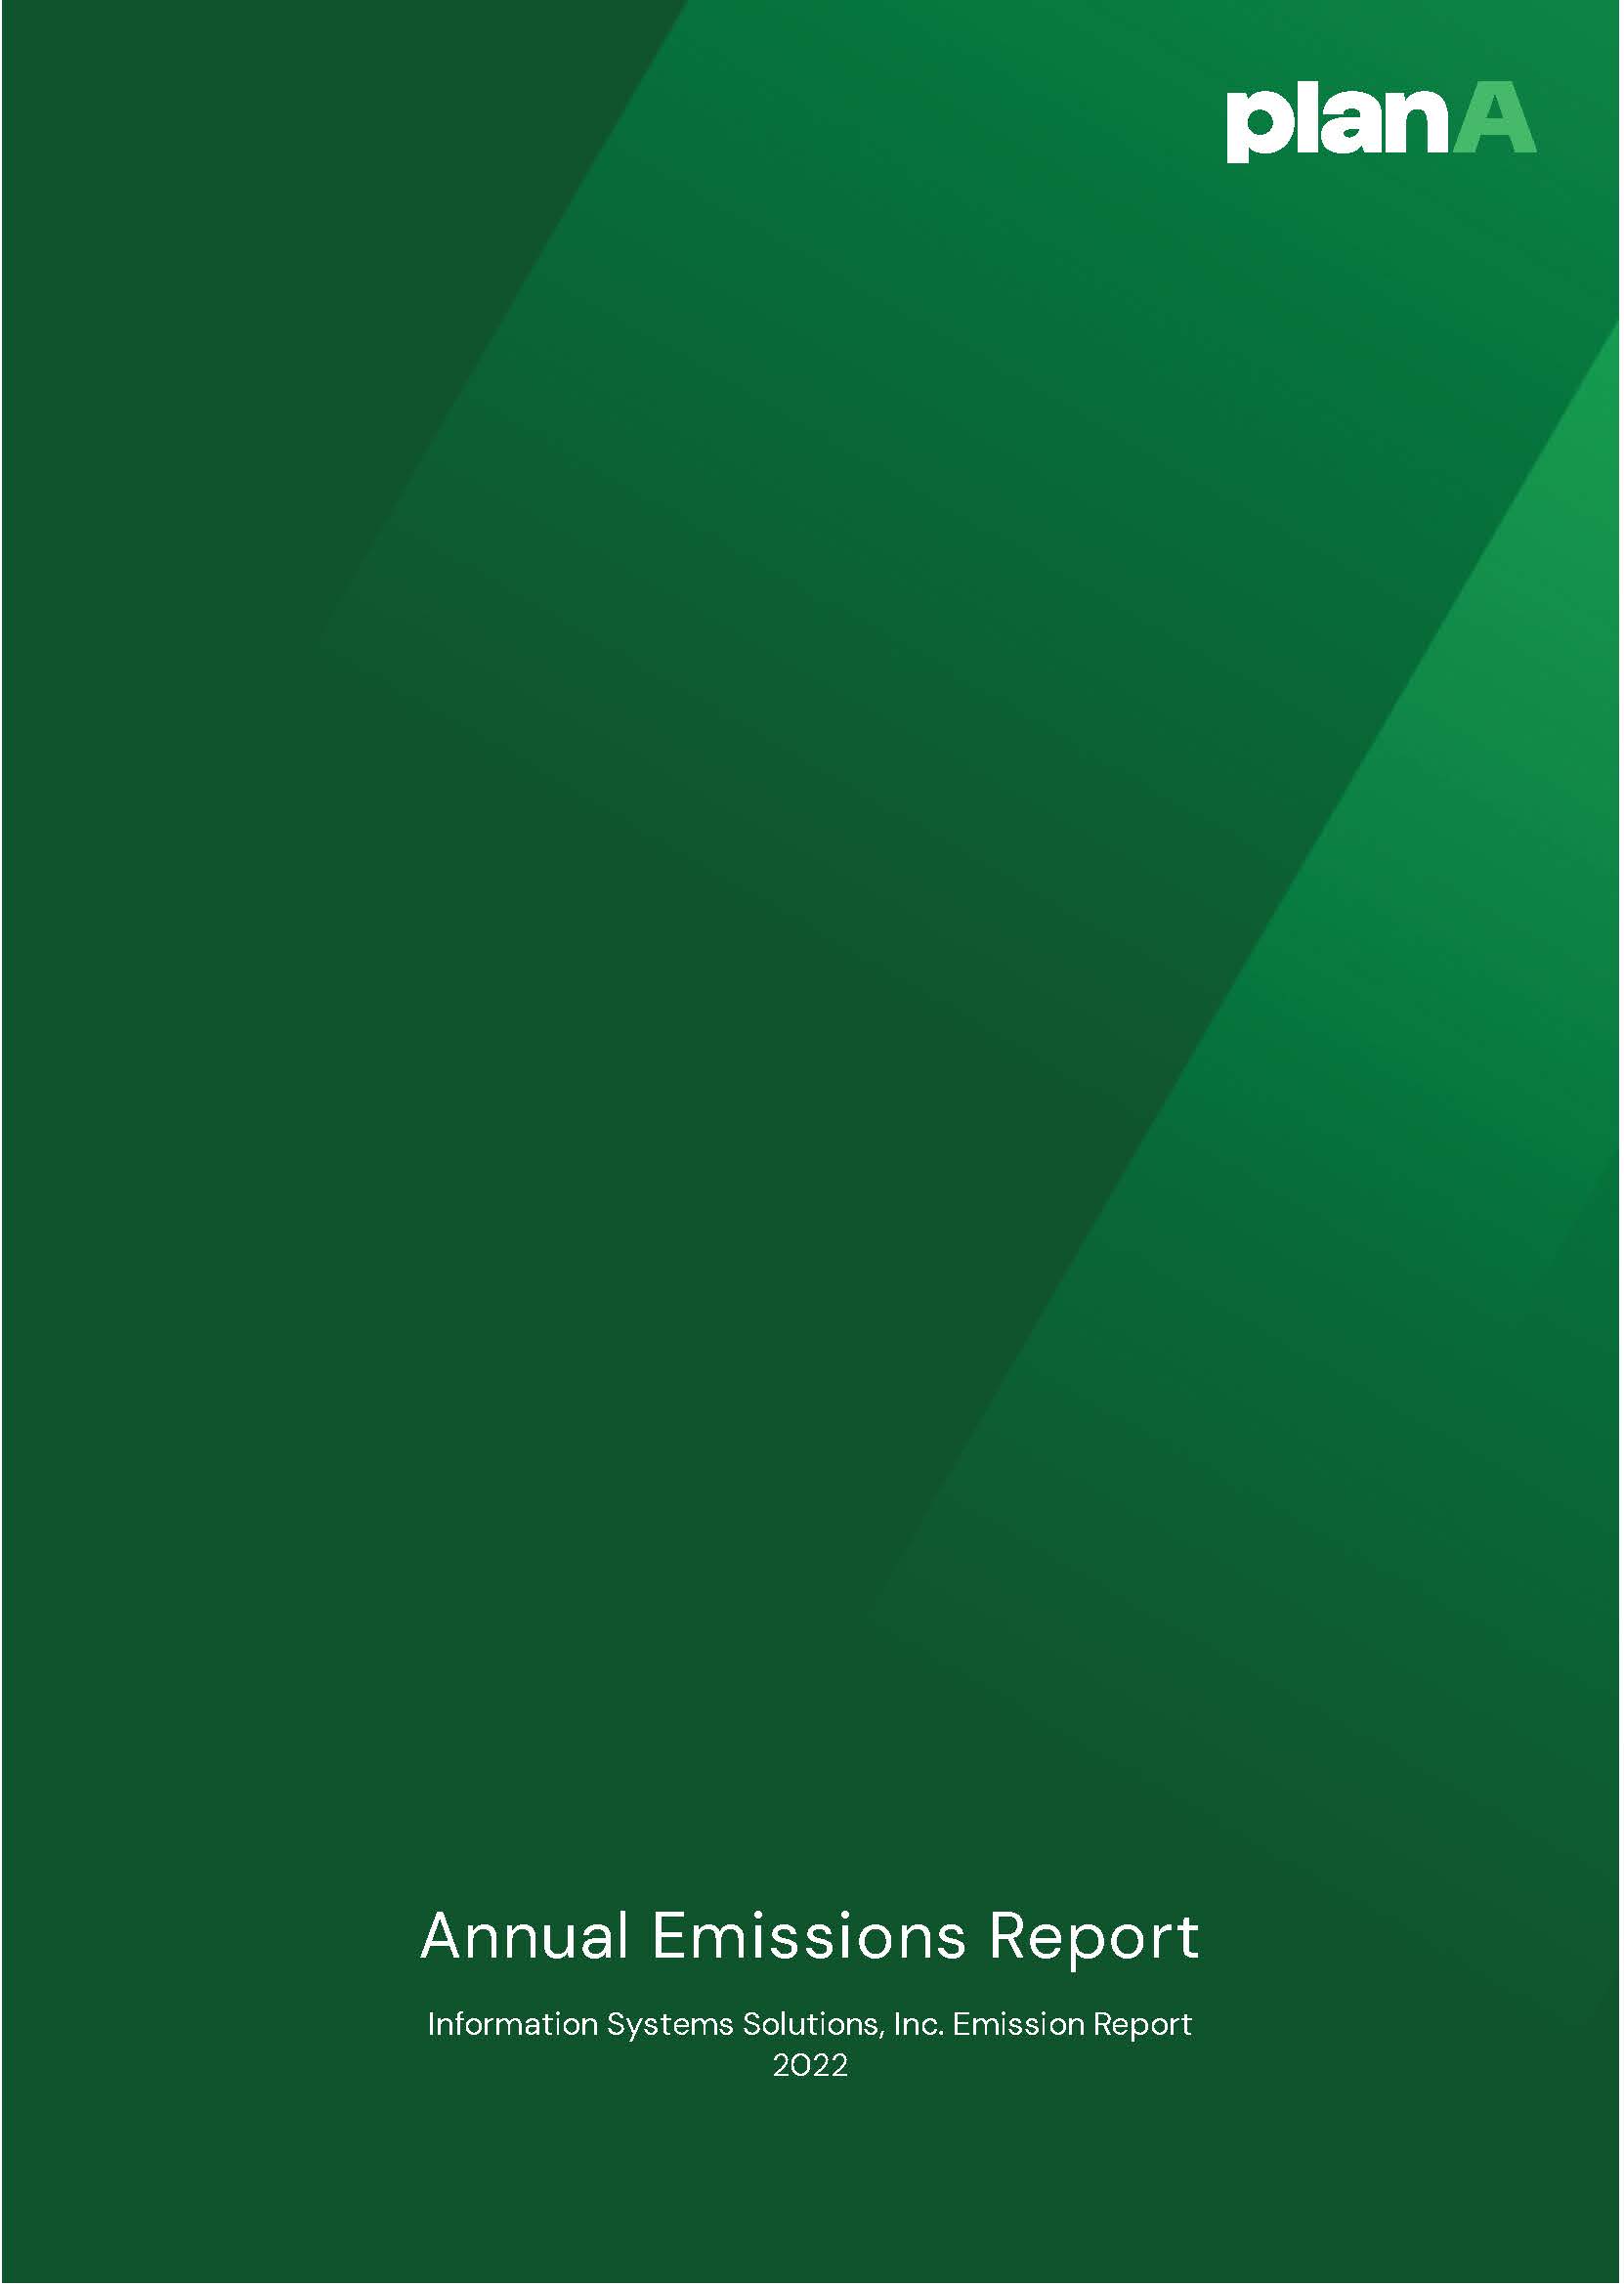 Going Greener - Tracking our Annual Emissions